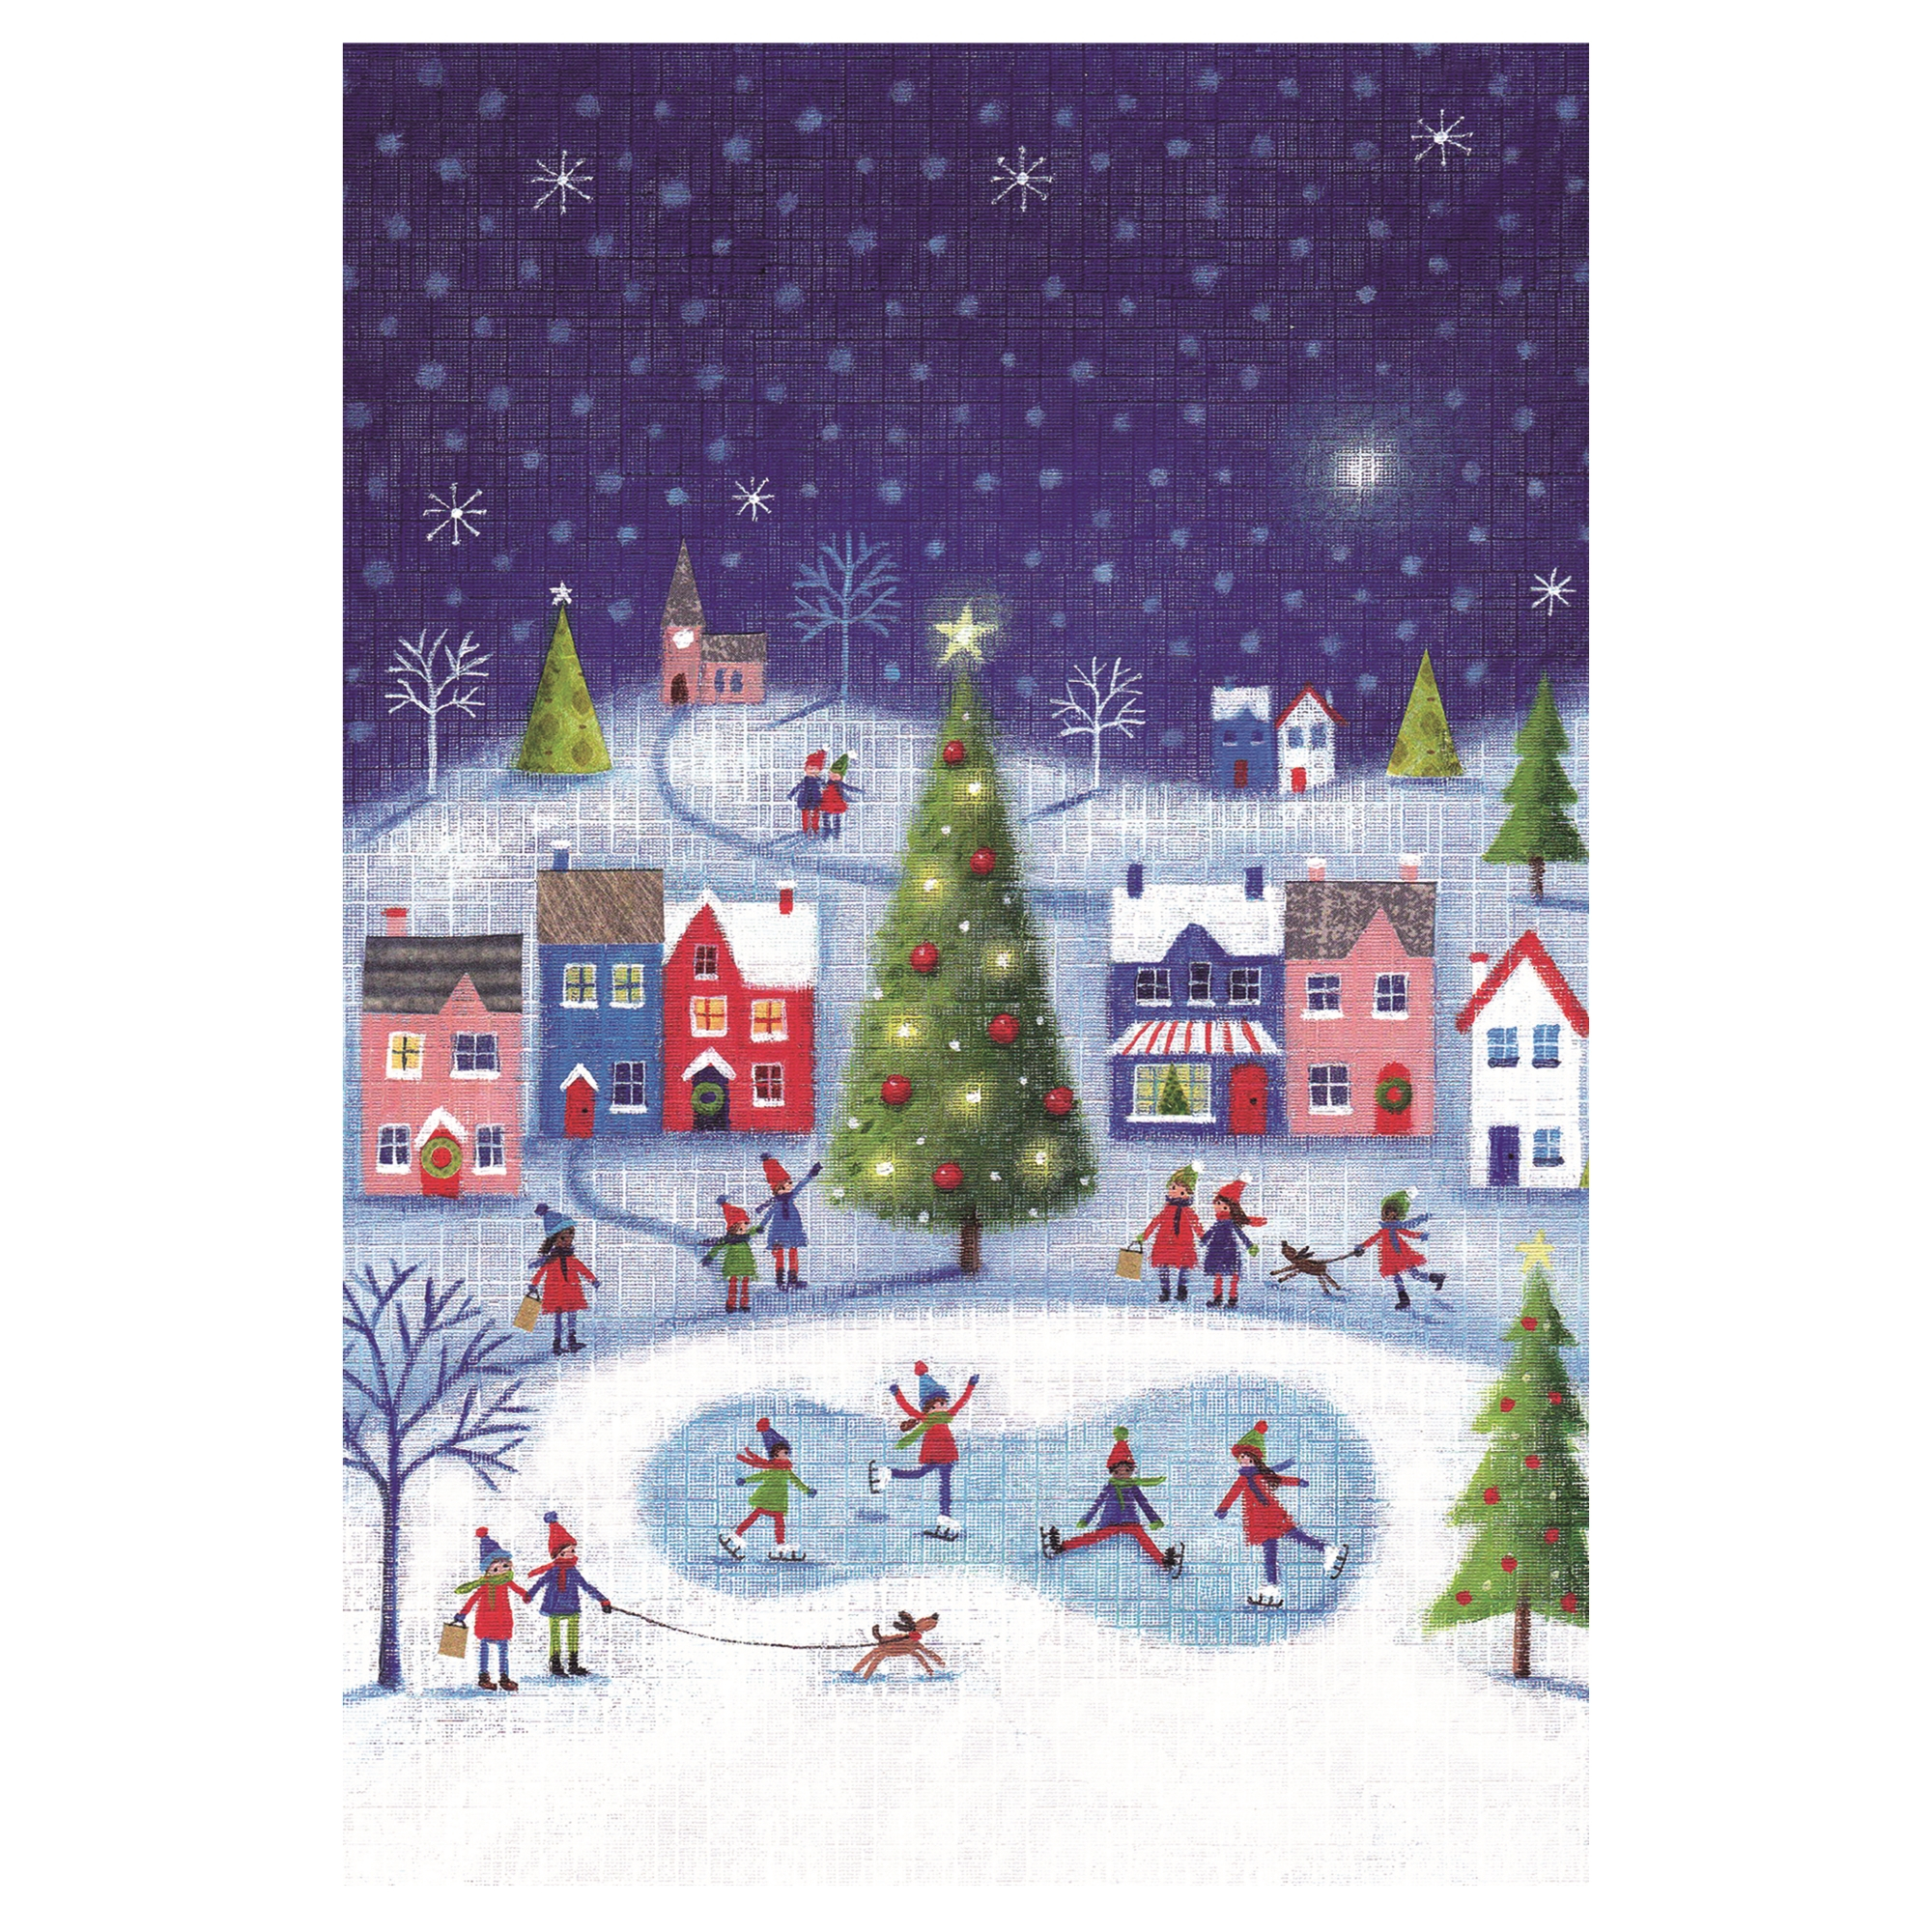 Charity Christmas Cards Uk Unicef Cards Ammxam Newyearinfo Site